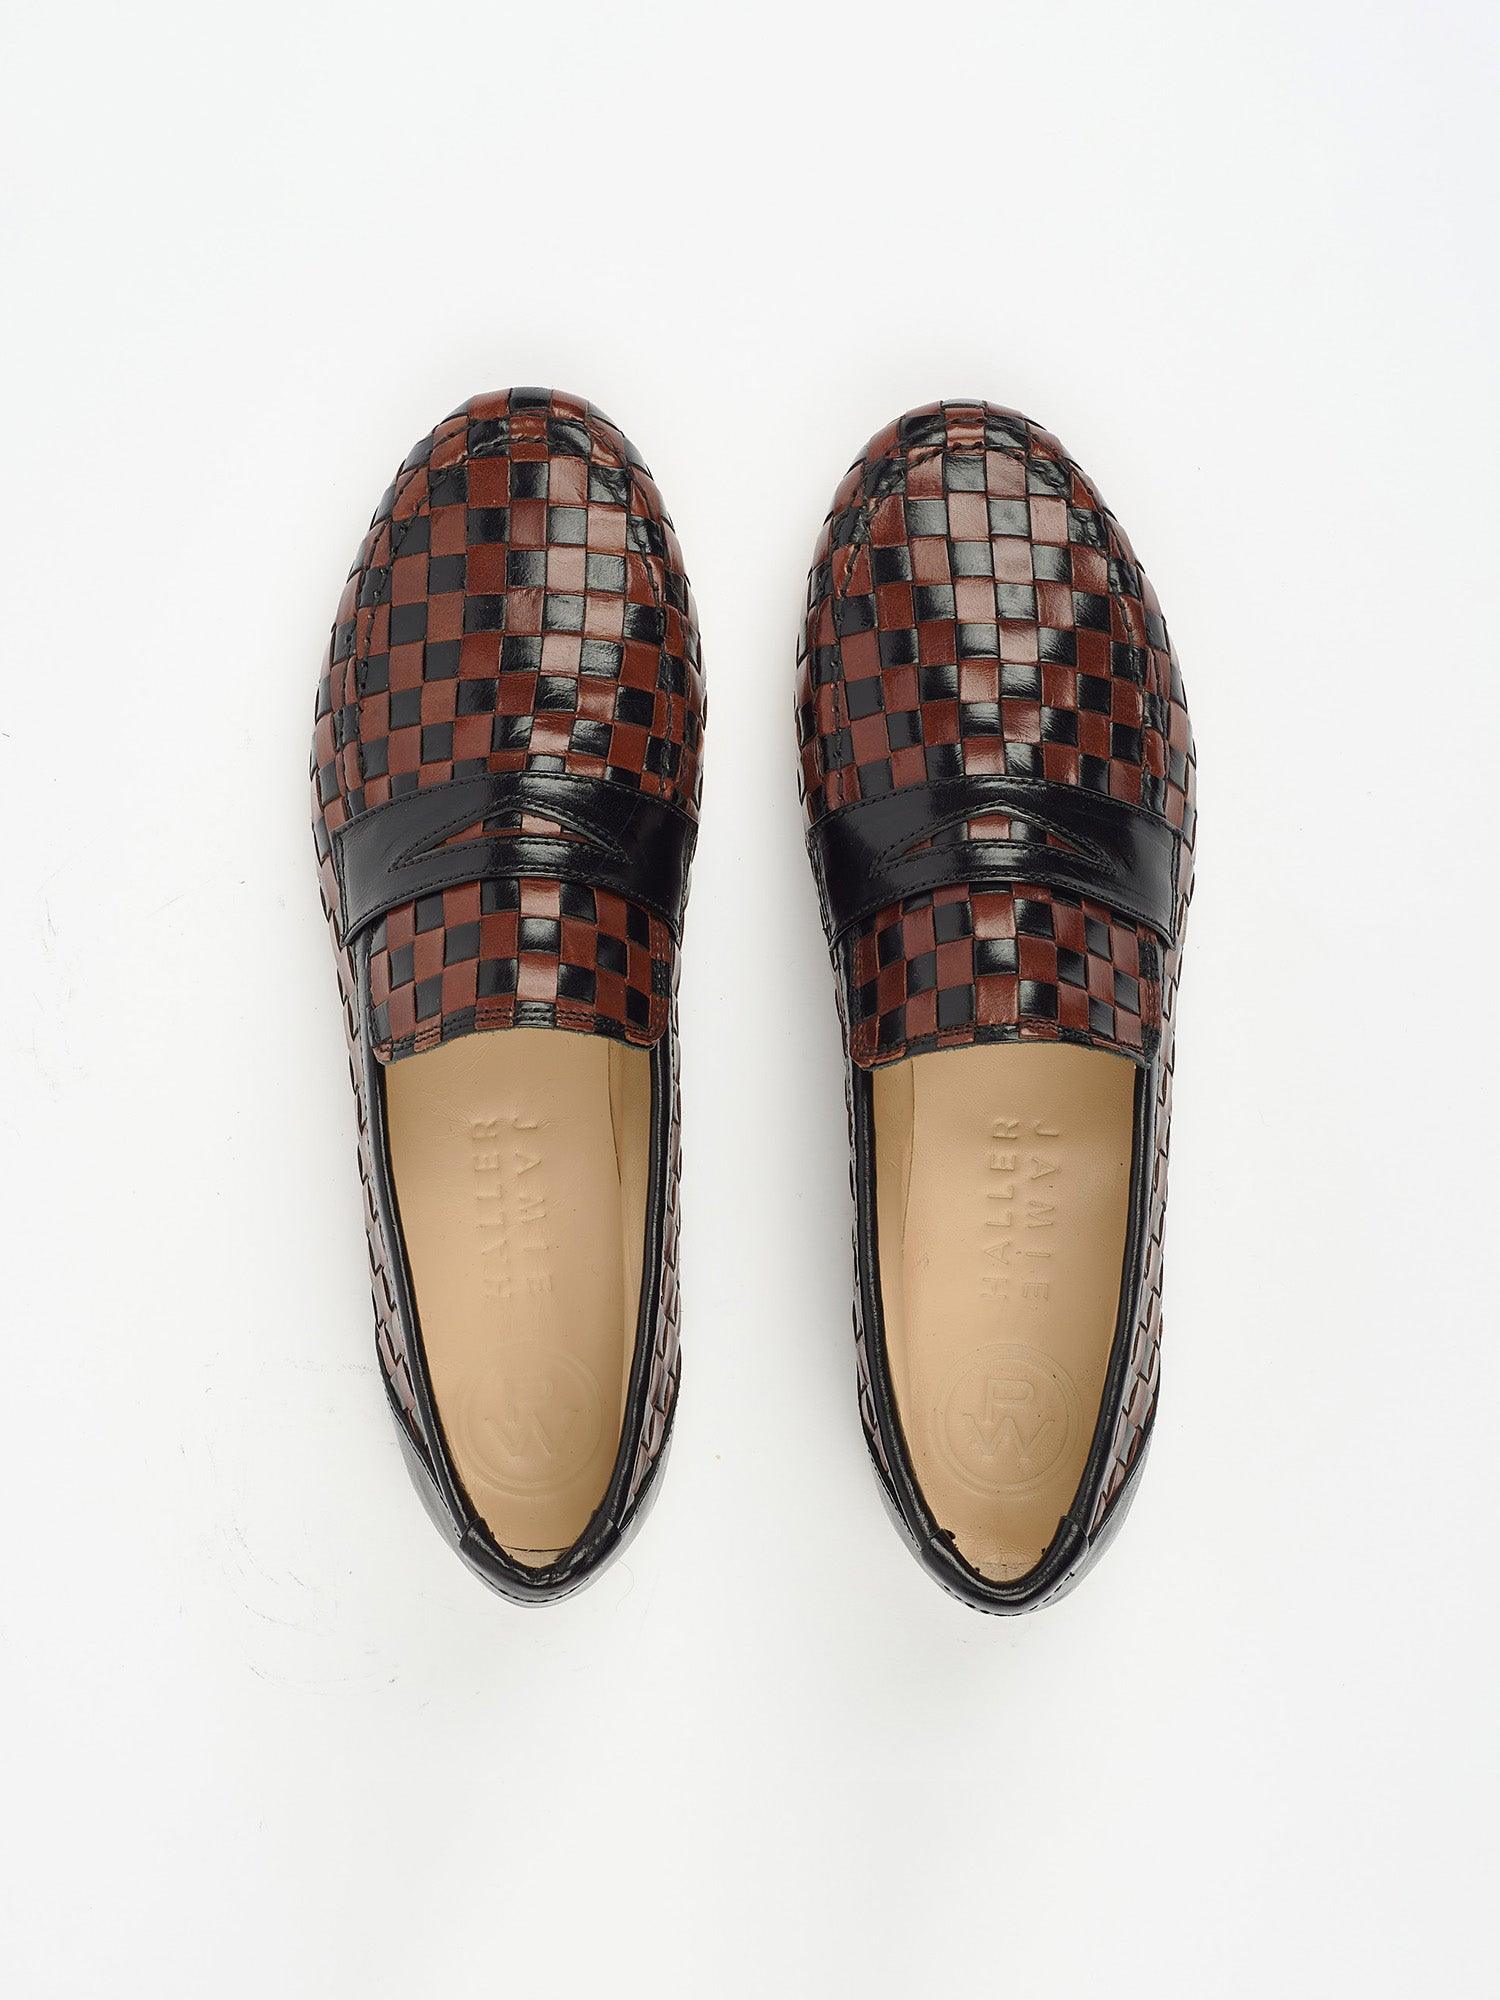 Black and Brown Woven Loafer Flat View